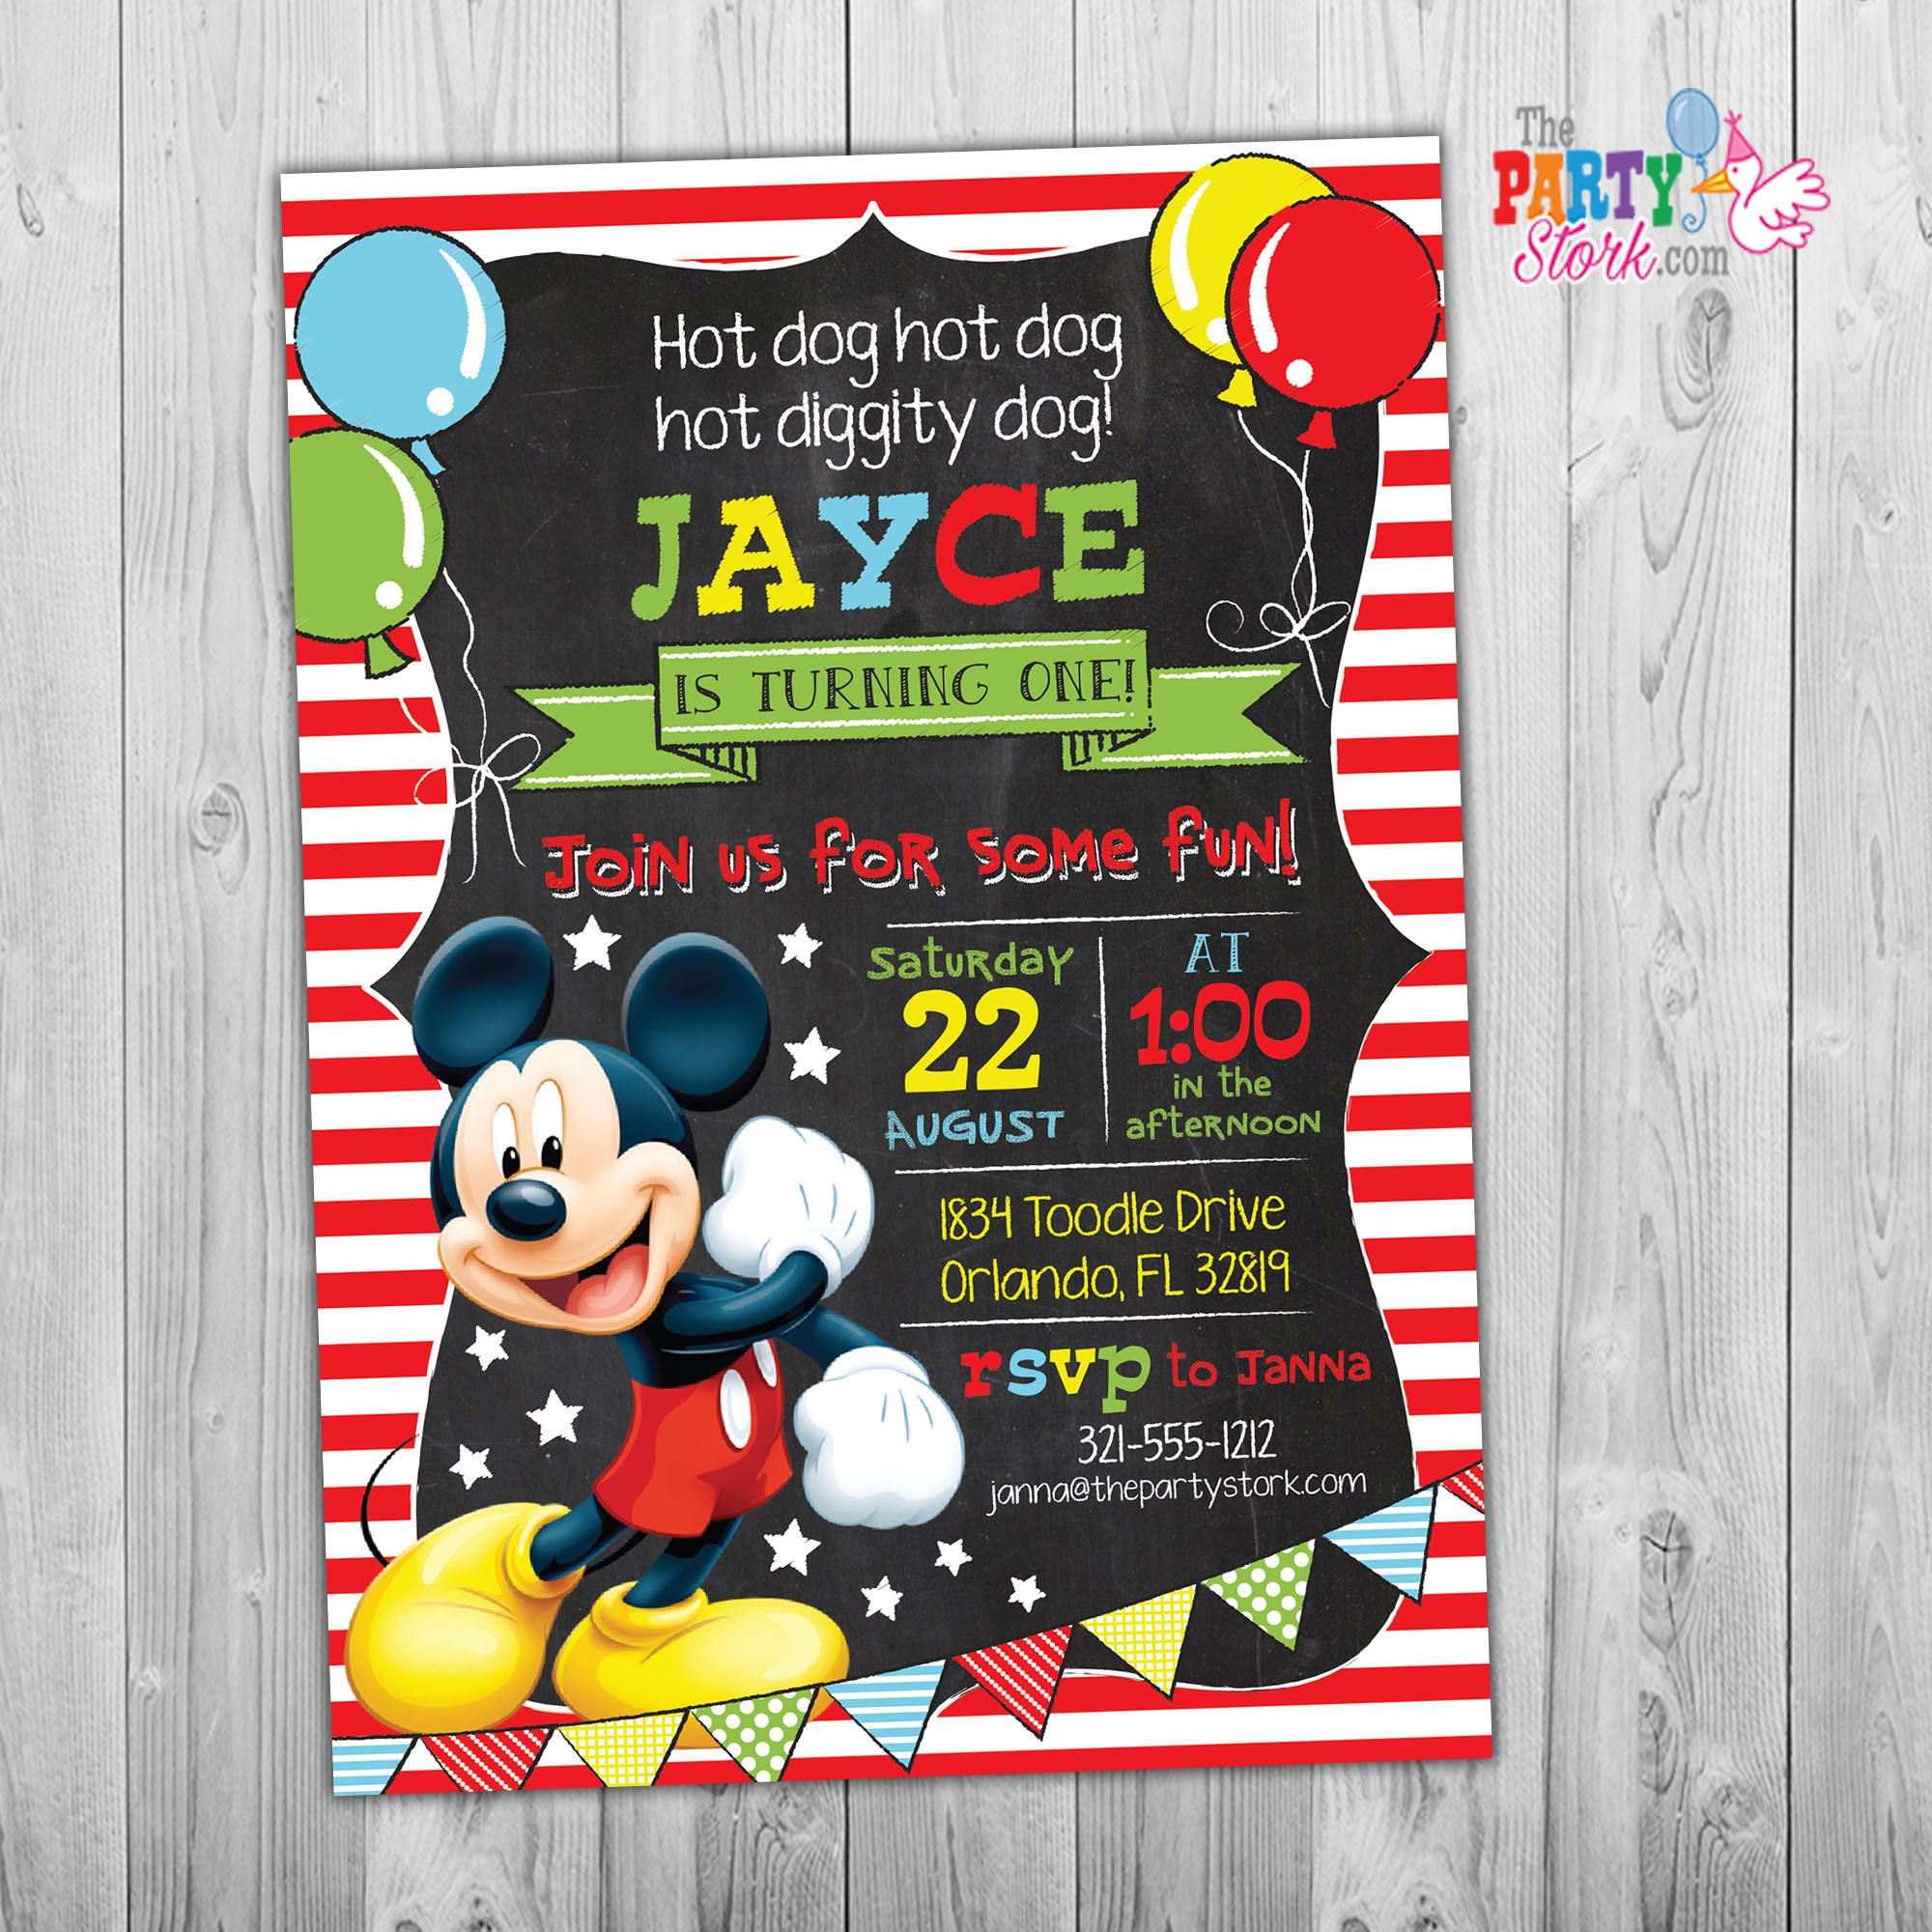 Paper Party Supplies Invitations Personalized Printable Invite Mickey 